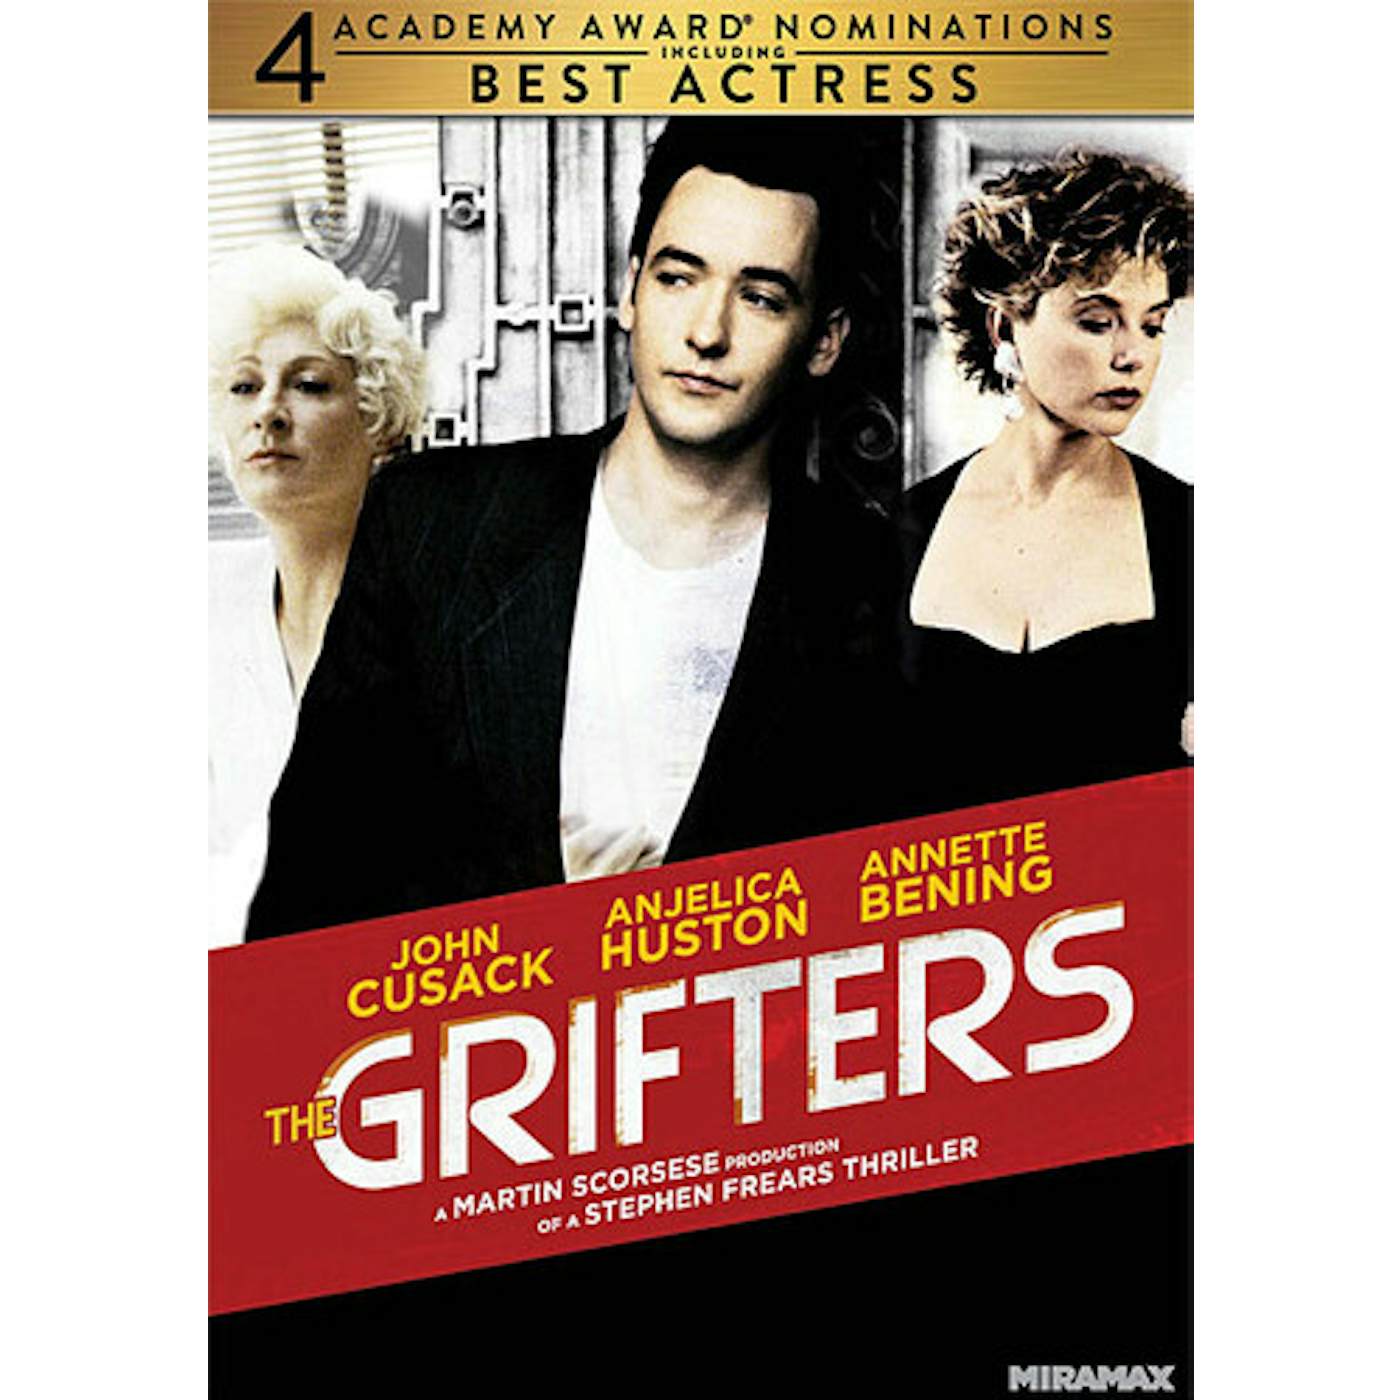 The Grifters DVD